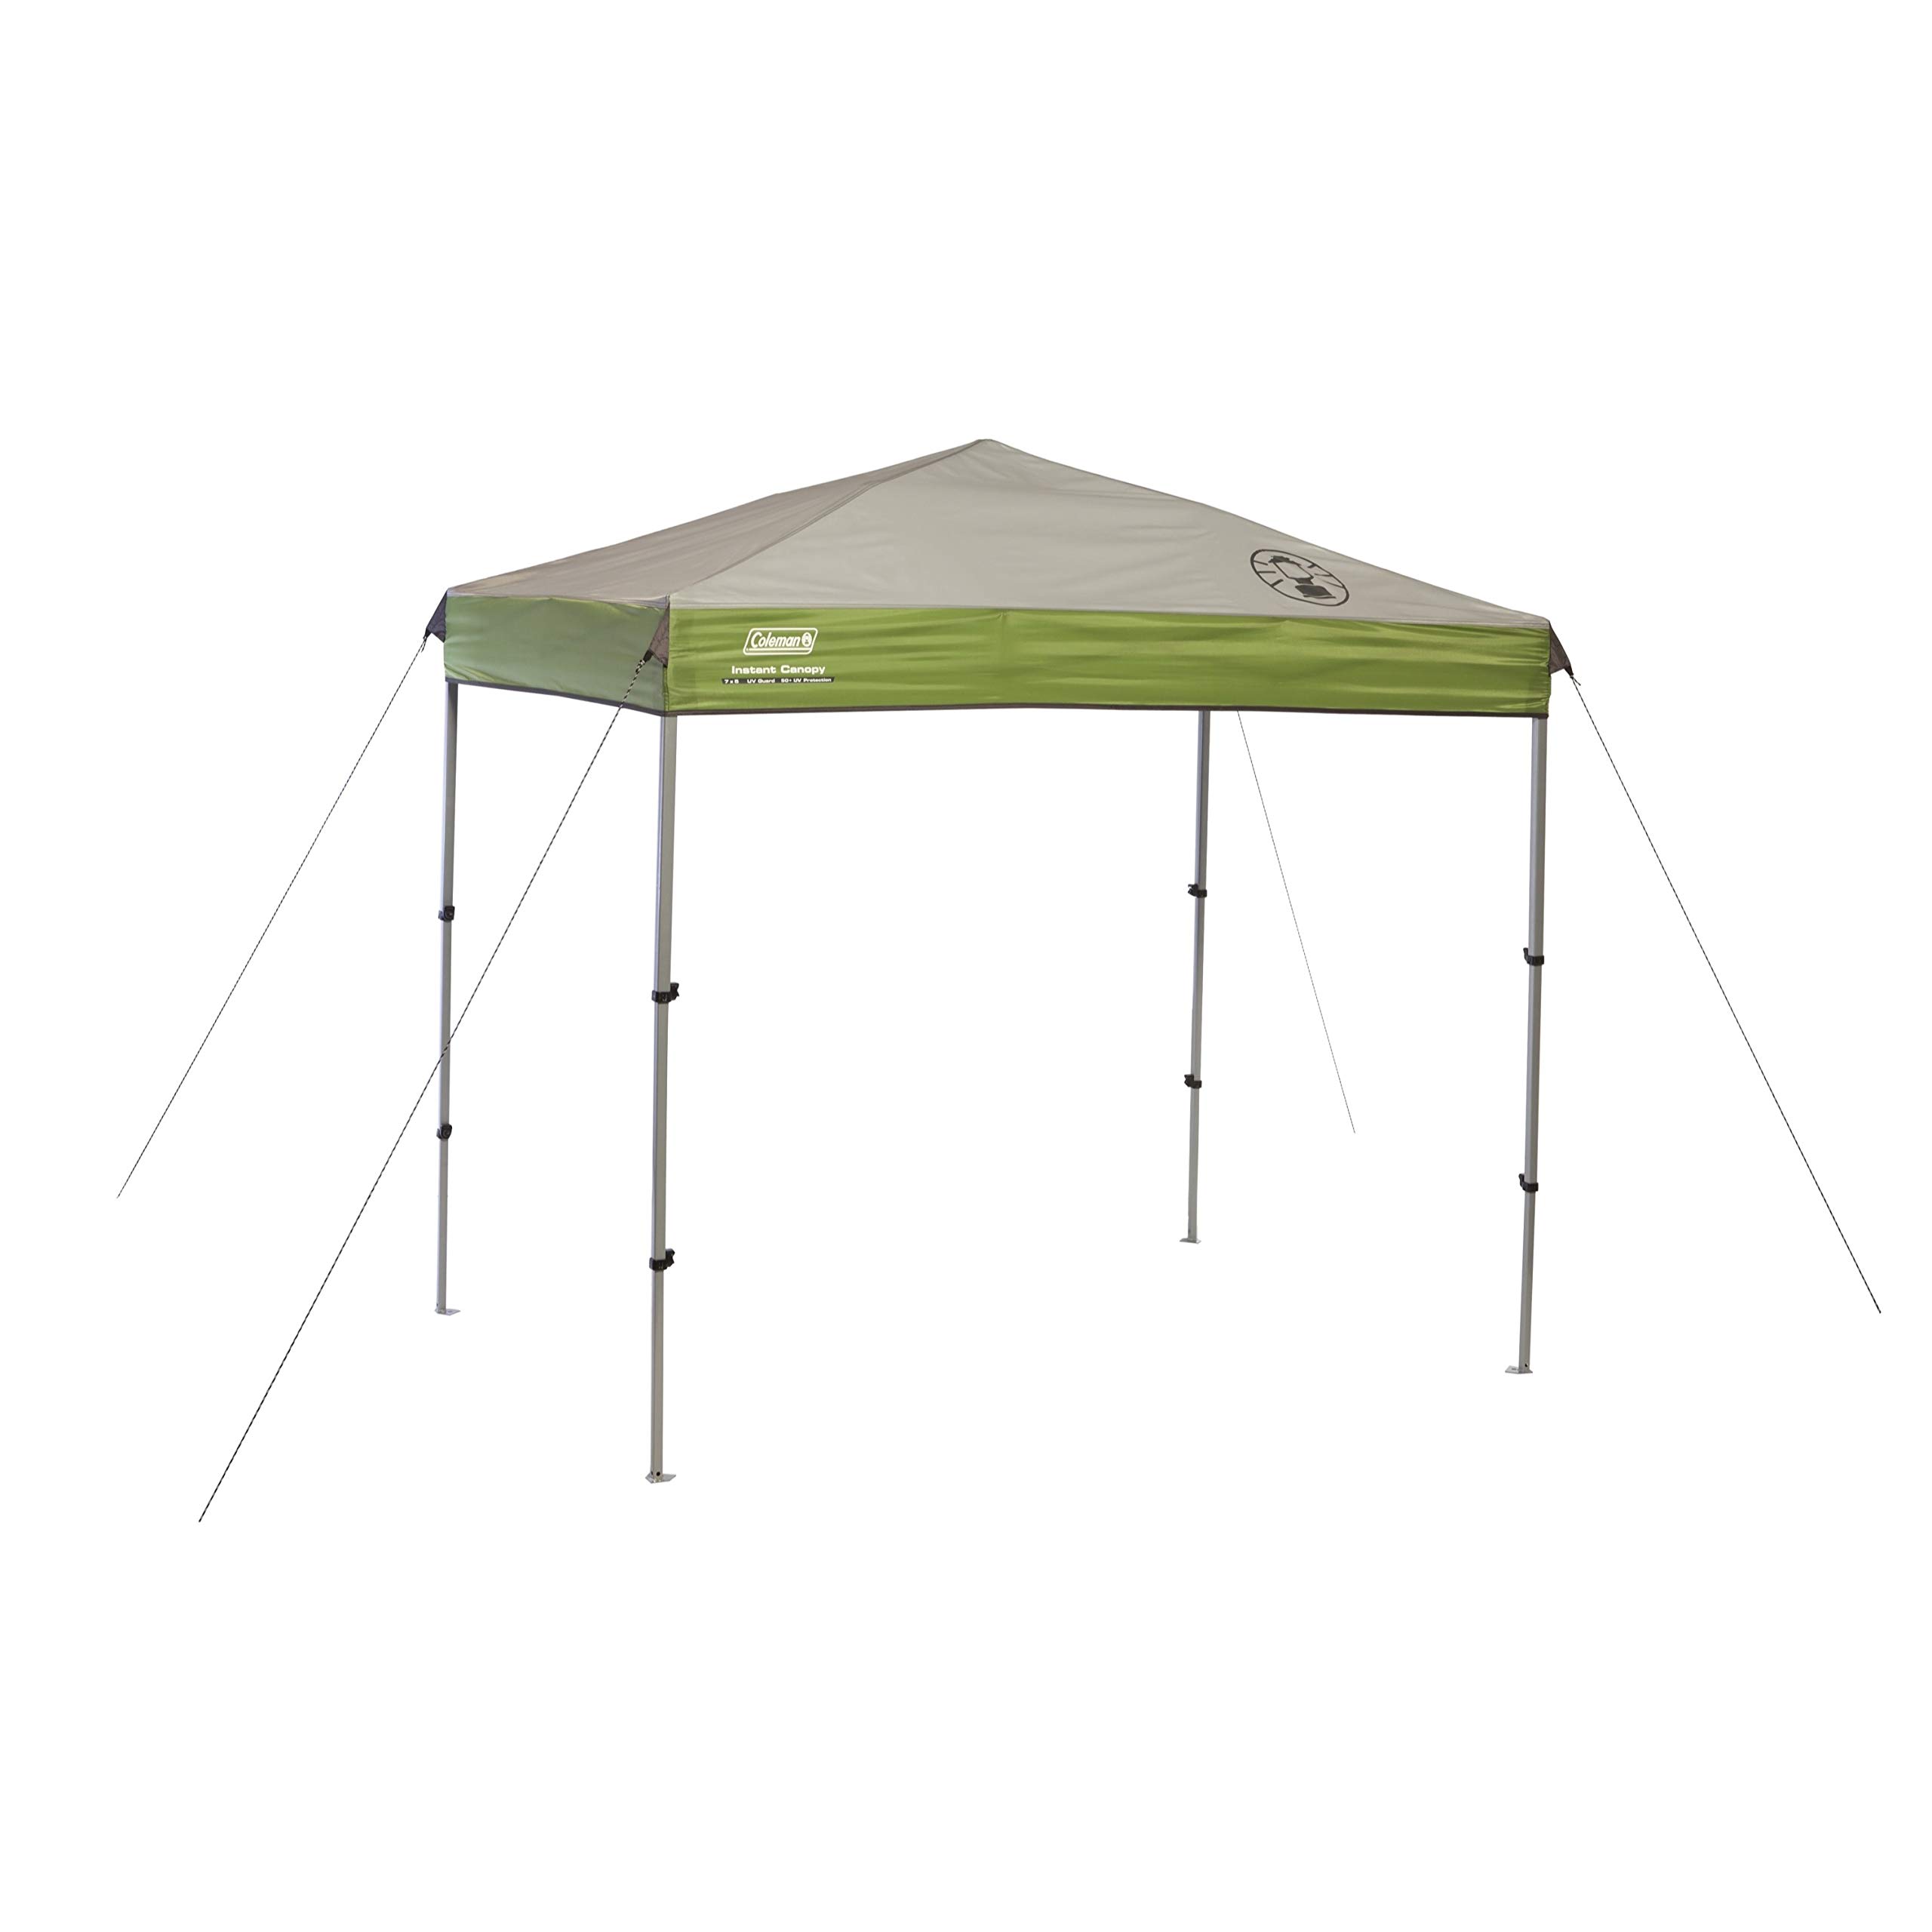 10' x 10' Coleman Canopy Tent Sun Shelter w/ Instant Setup $92.21 + Free Shipping